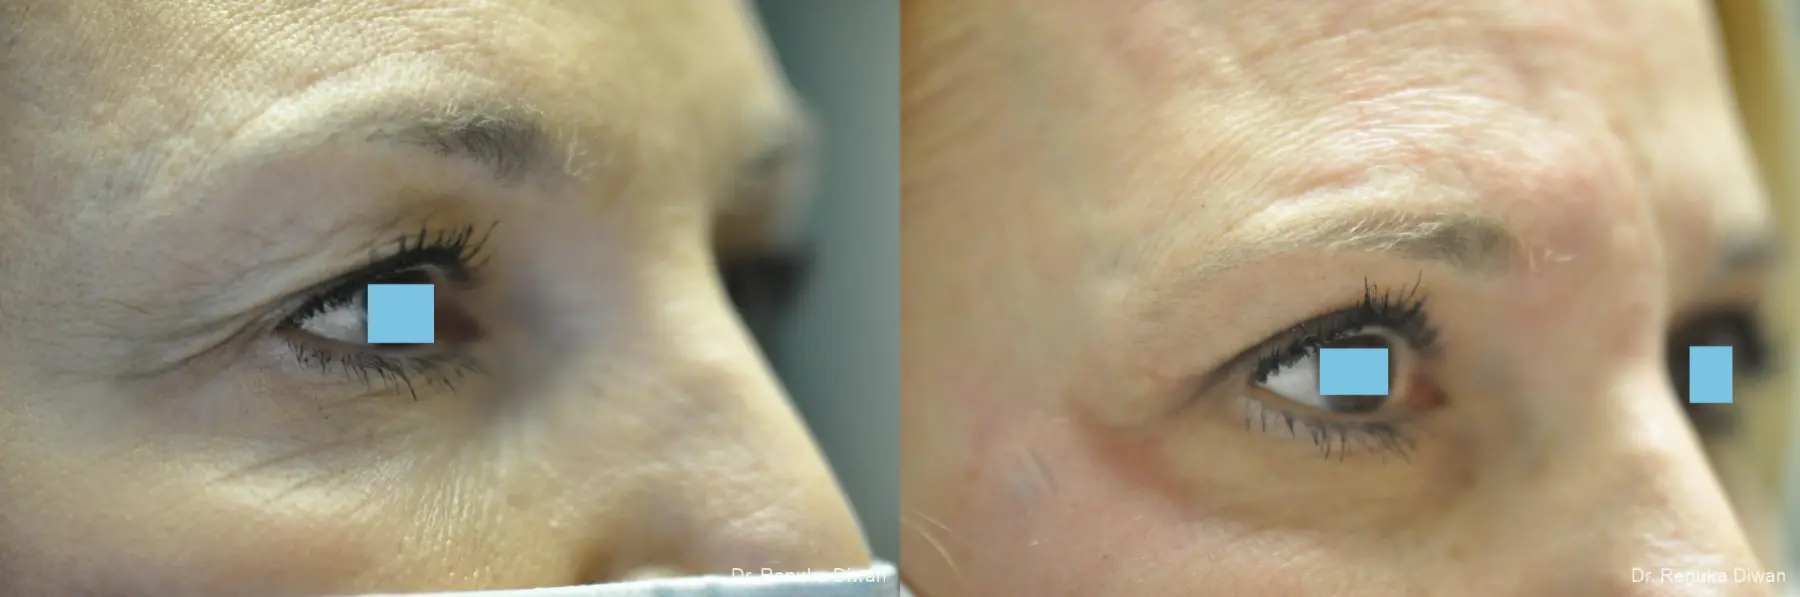 Blepharoplasty: Patient 7 - Before and After 4